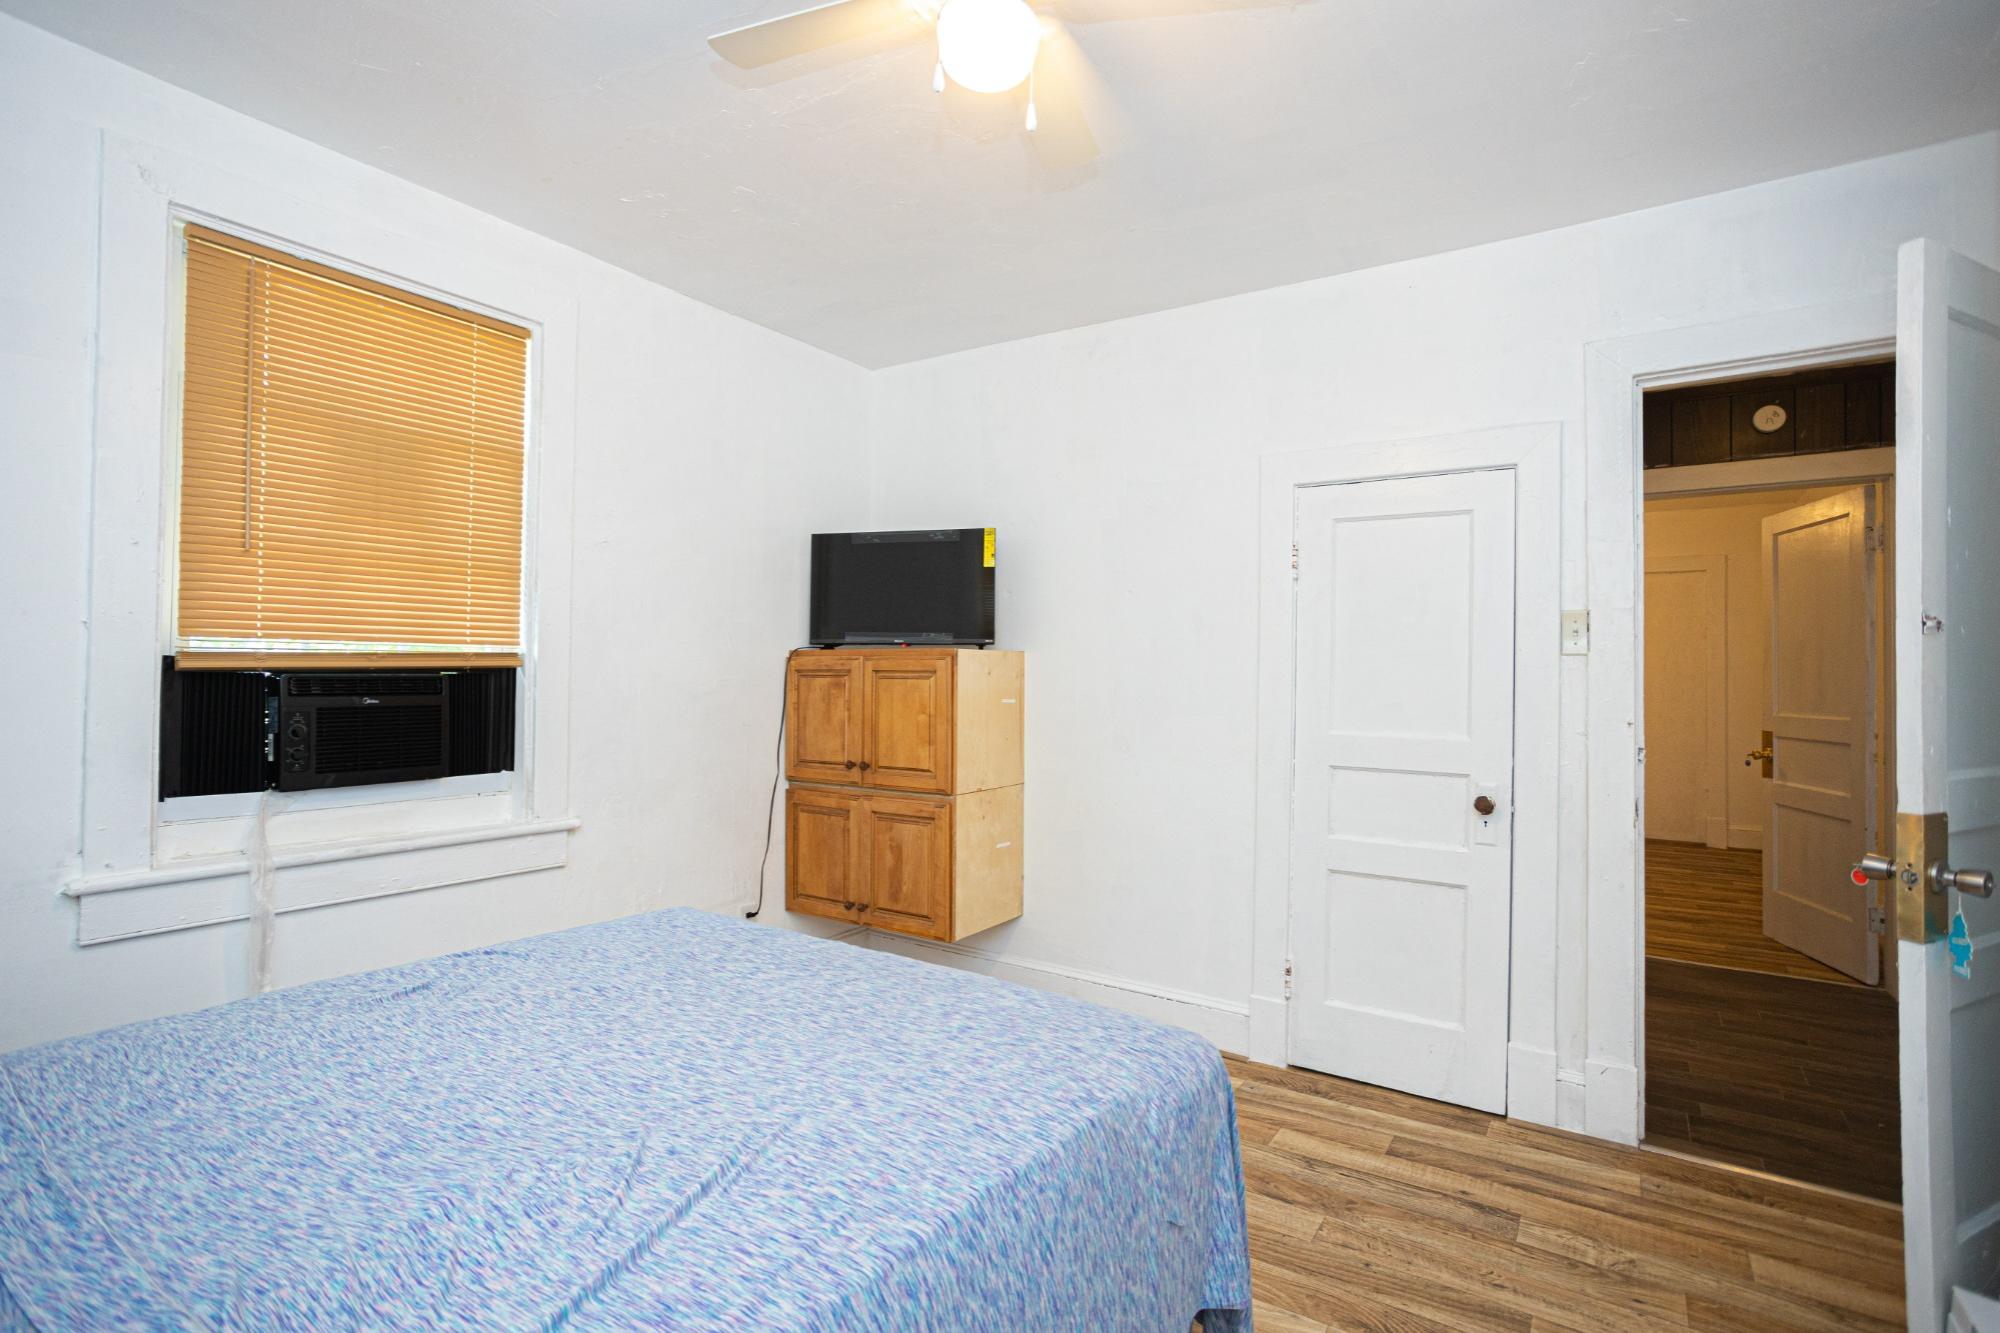 Richmond, VA Affordable Rooms for Rent from $131